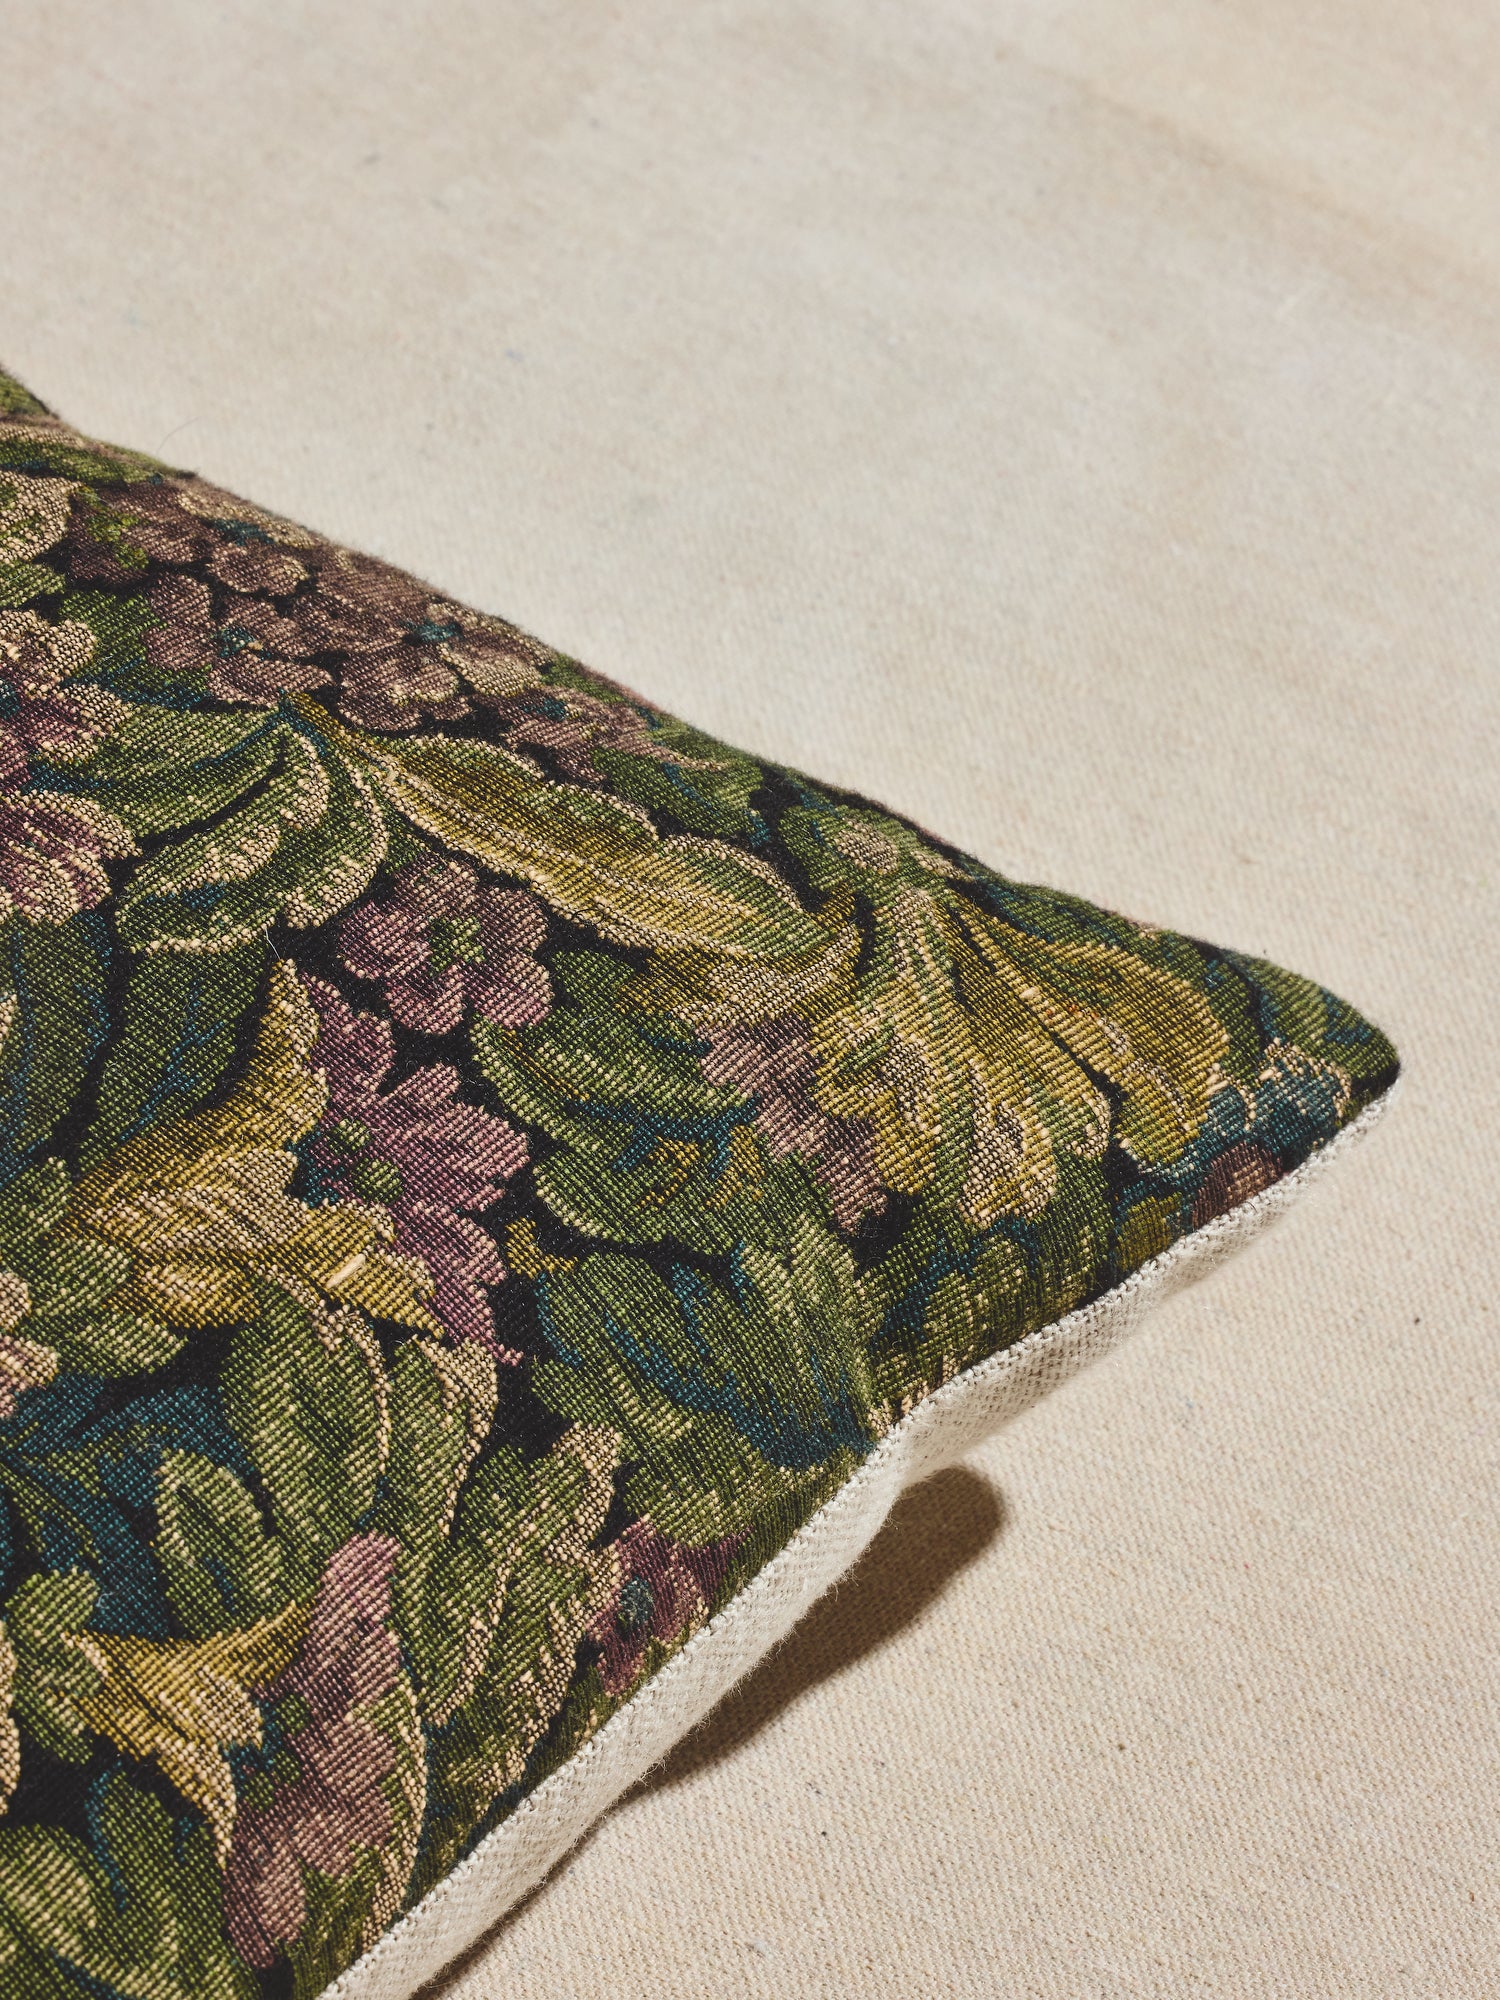 Bayou bloom vintage floral lumbar pillow in green, blue, lilac, and ochre.